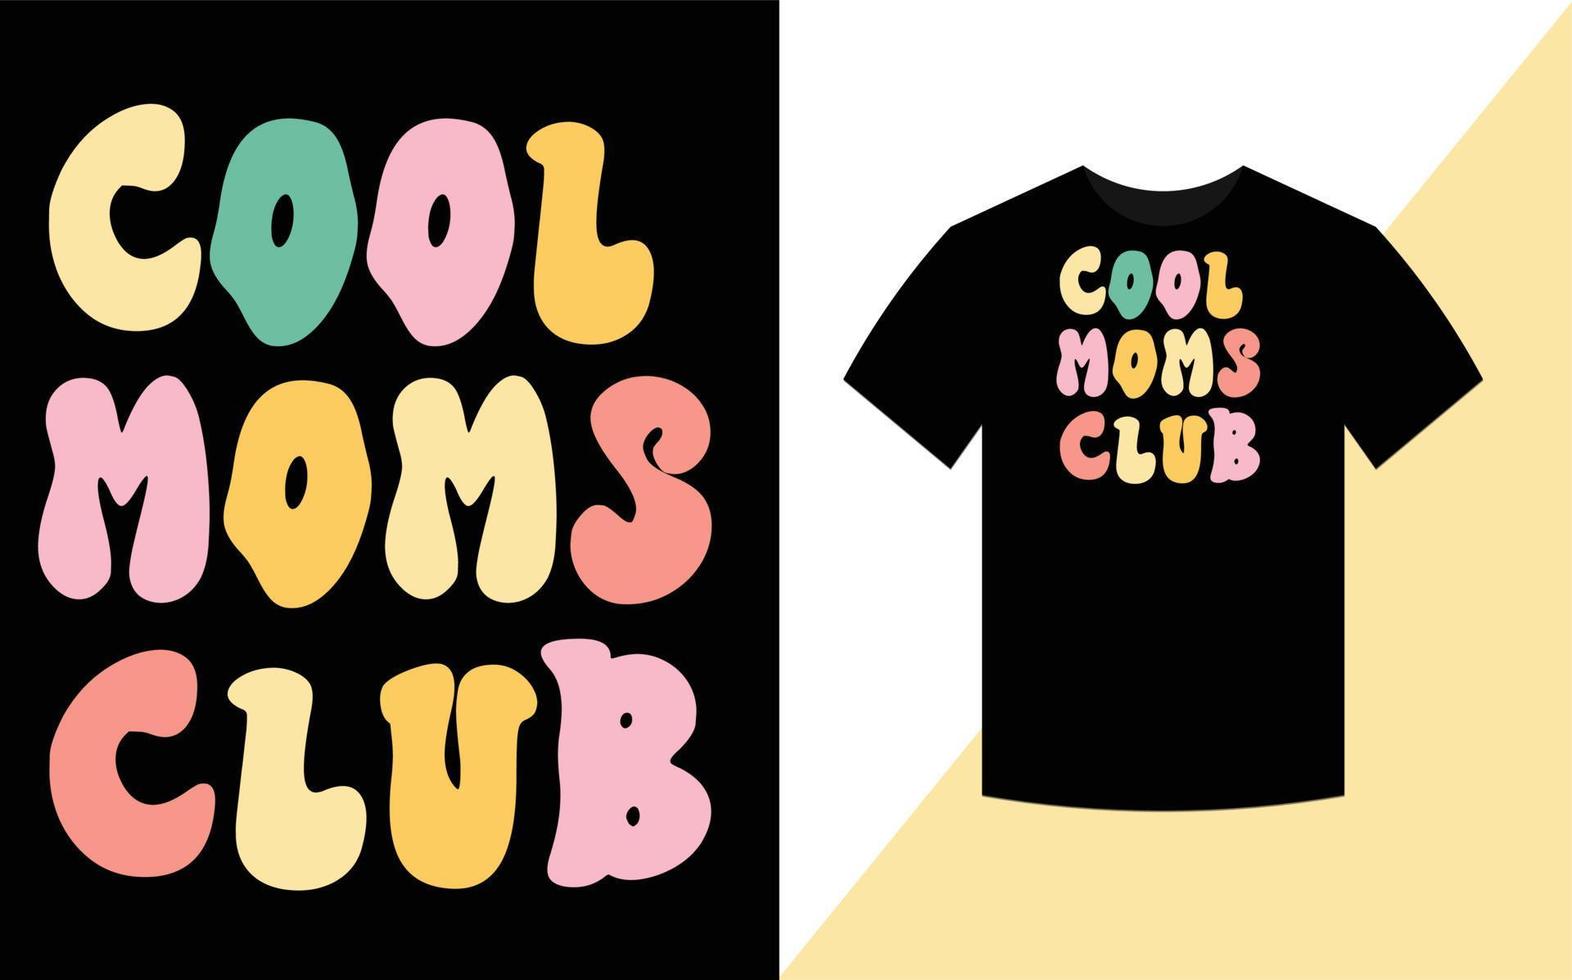 Cool Moms Club, Mother's Day Best retro groovy t shirt design. vector